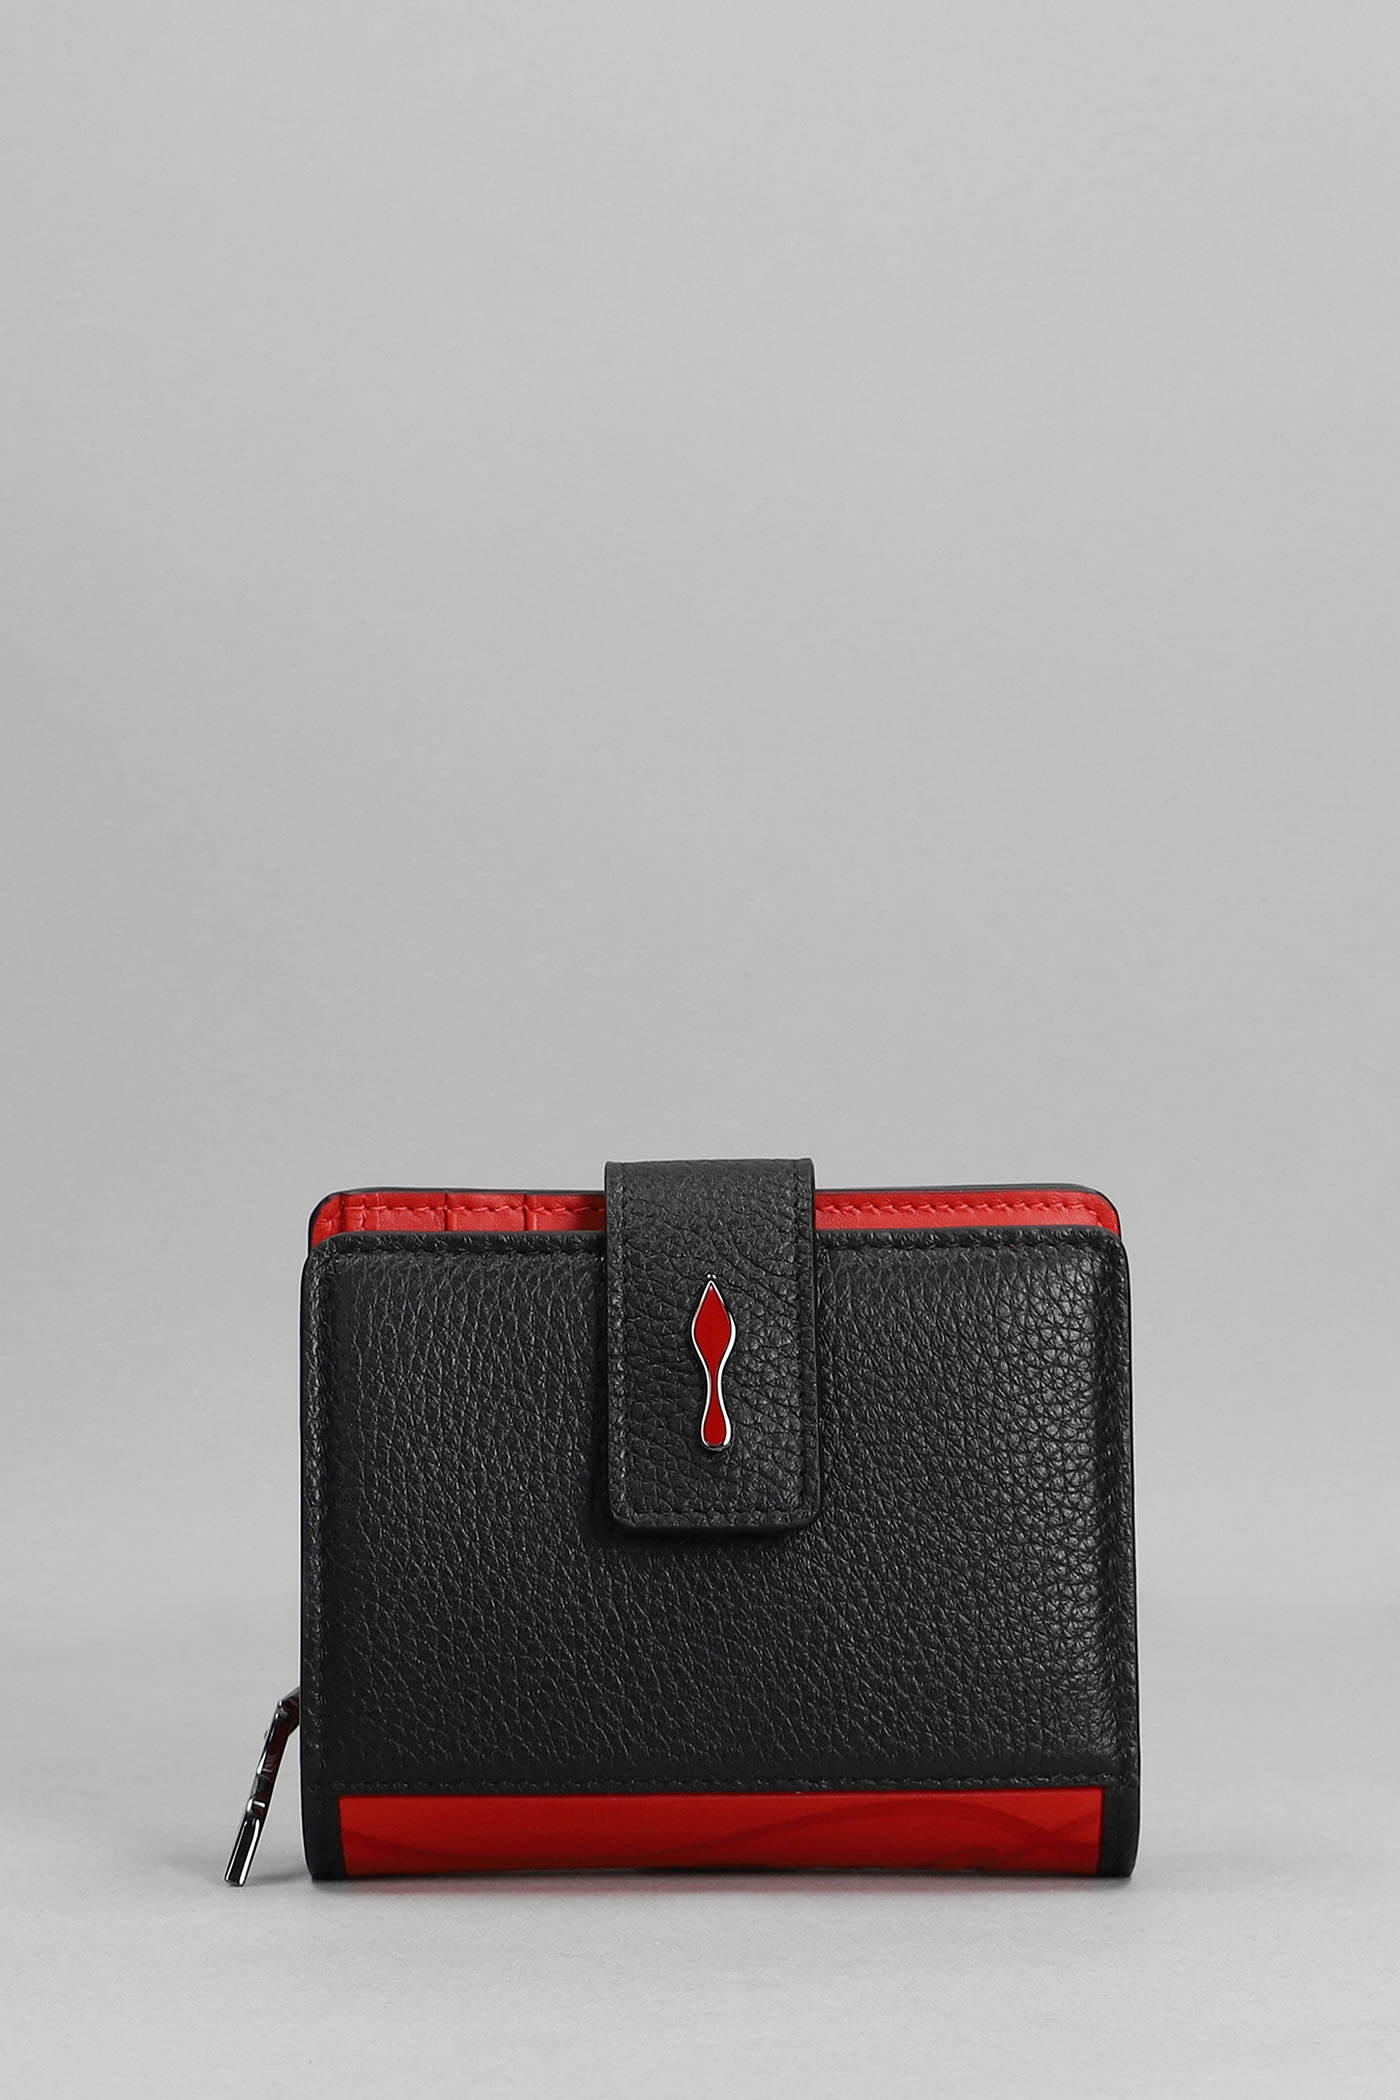 Christian Louboutin Wallet In Black Leather